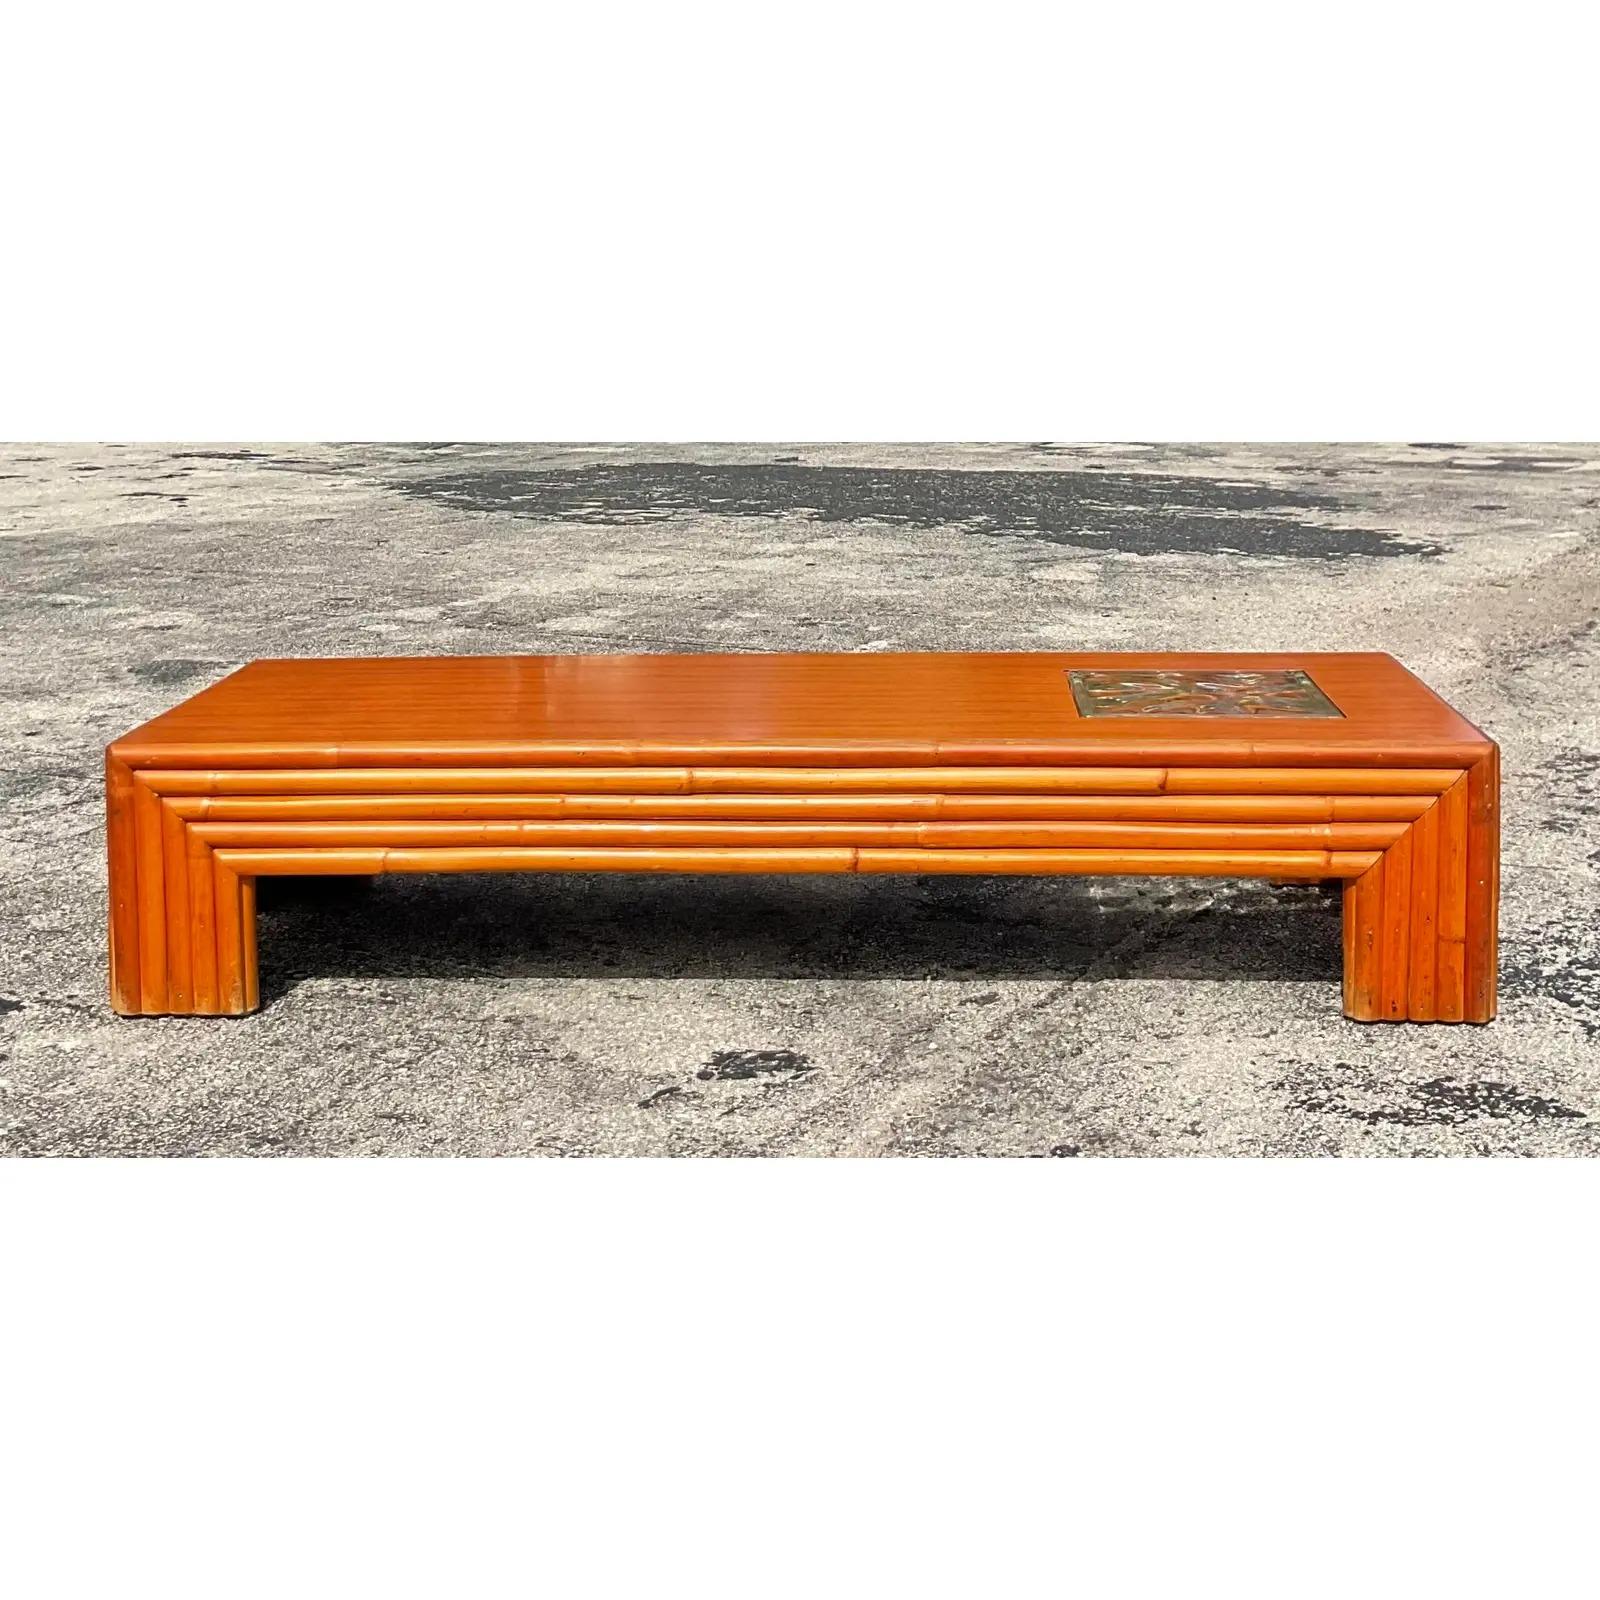 A fabulous vintage Coastal coffee table. A chic and simple design with thick pretzel rattan frame and a laminate top and inset glass cube. Gorgeous and functional. Perfect for high traffic areas or your Airbnb. Acquired from a Palm Beach estate.